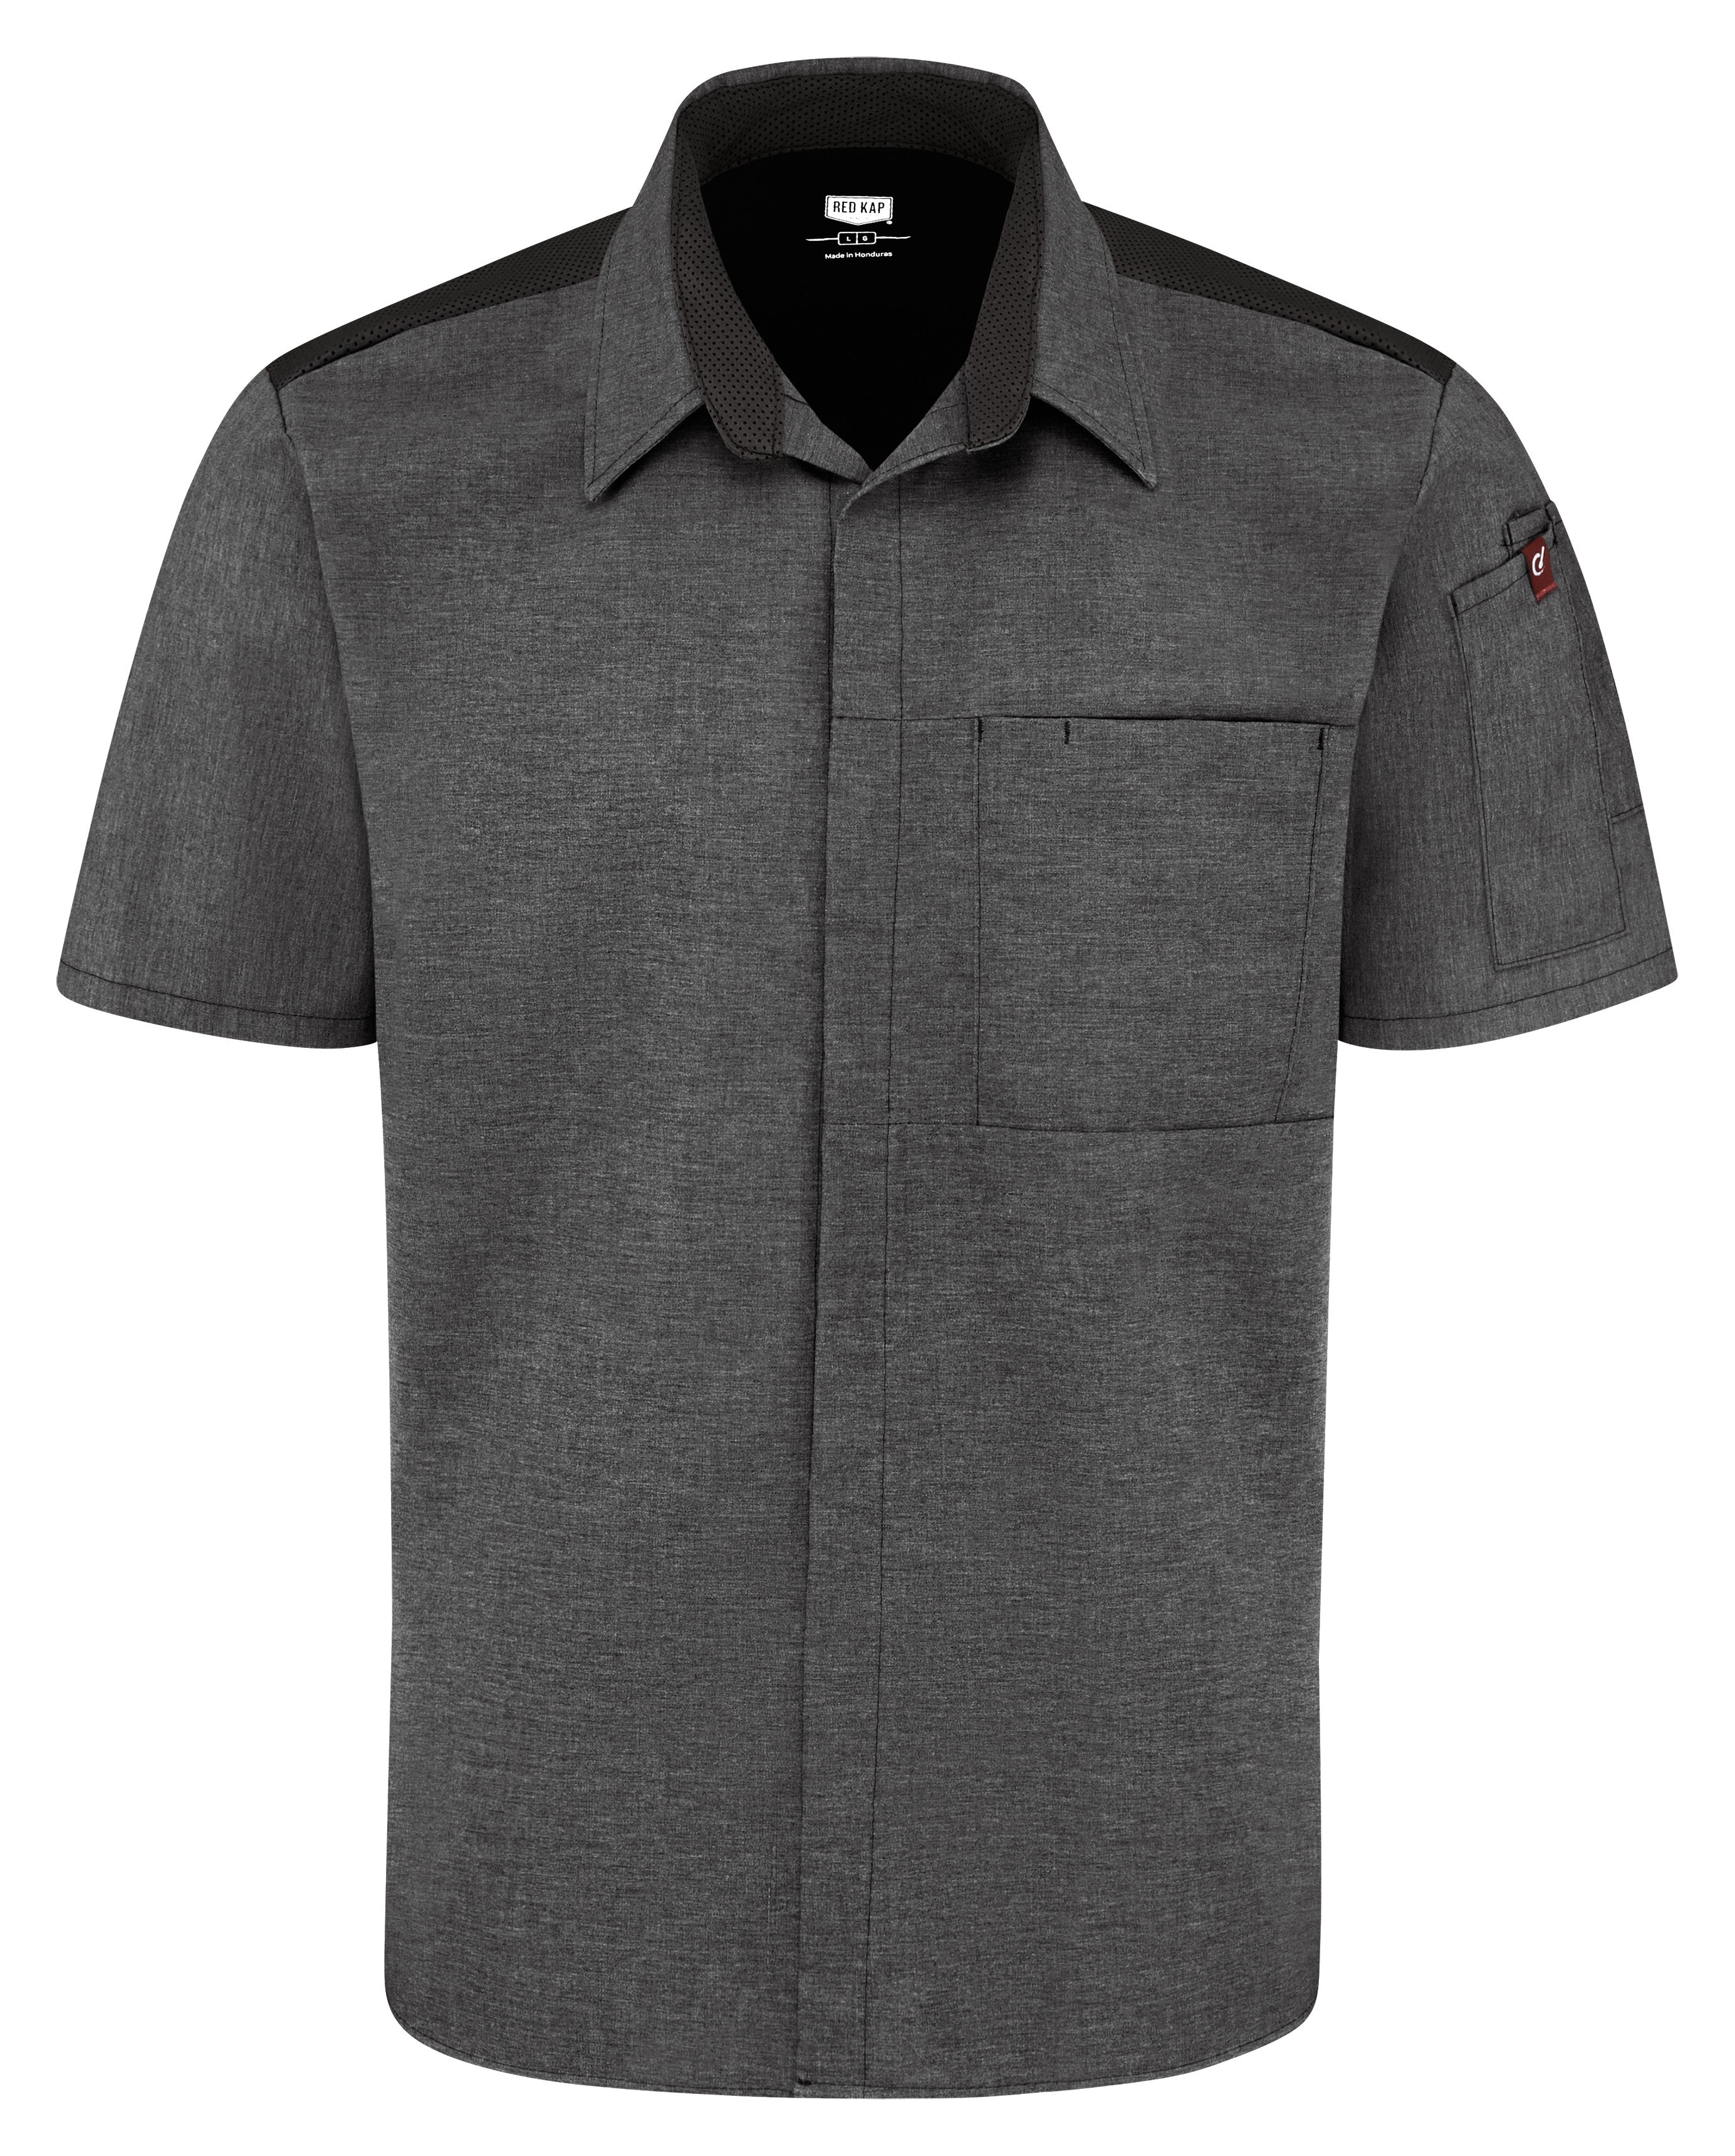 Men's Airflow Cook Shirt with OilBlok 502M - Charcoal Heather with Charcoal/Black Mesh-eSafety Supplies, Inc